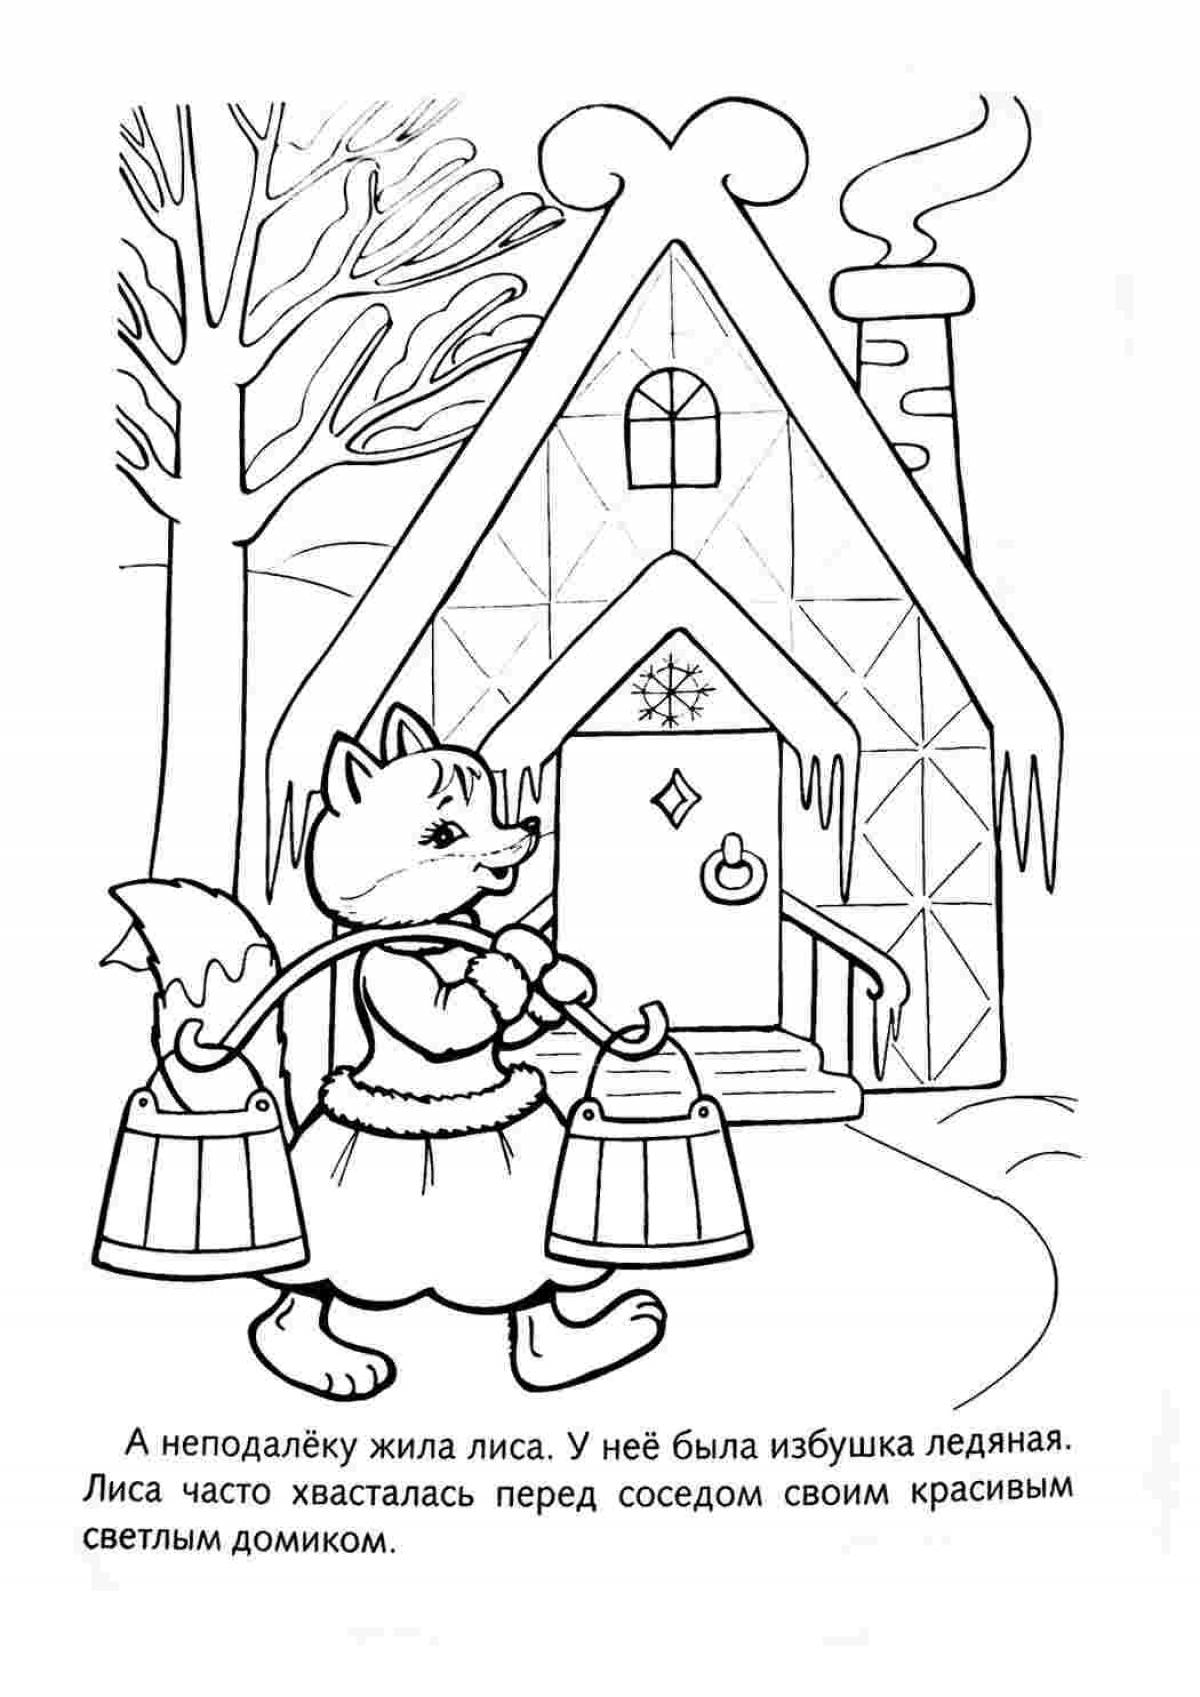 Unbeatable cat house coloring page for kids